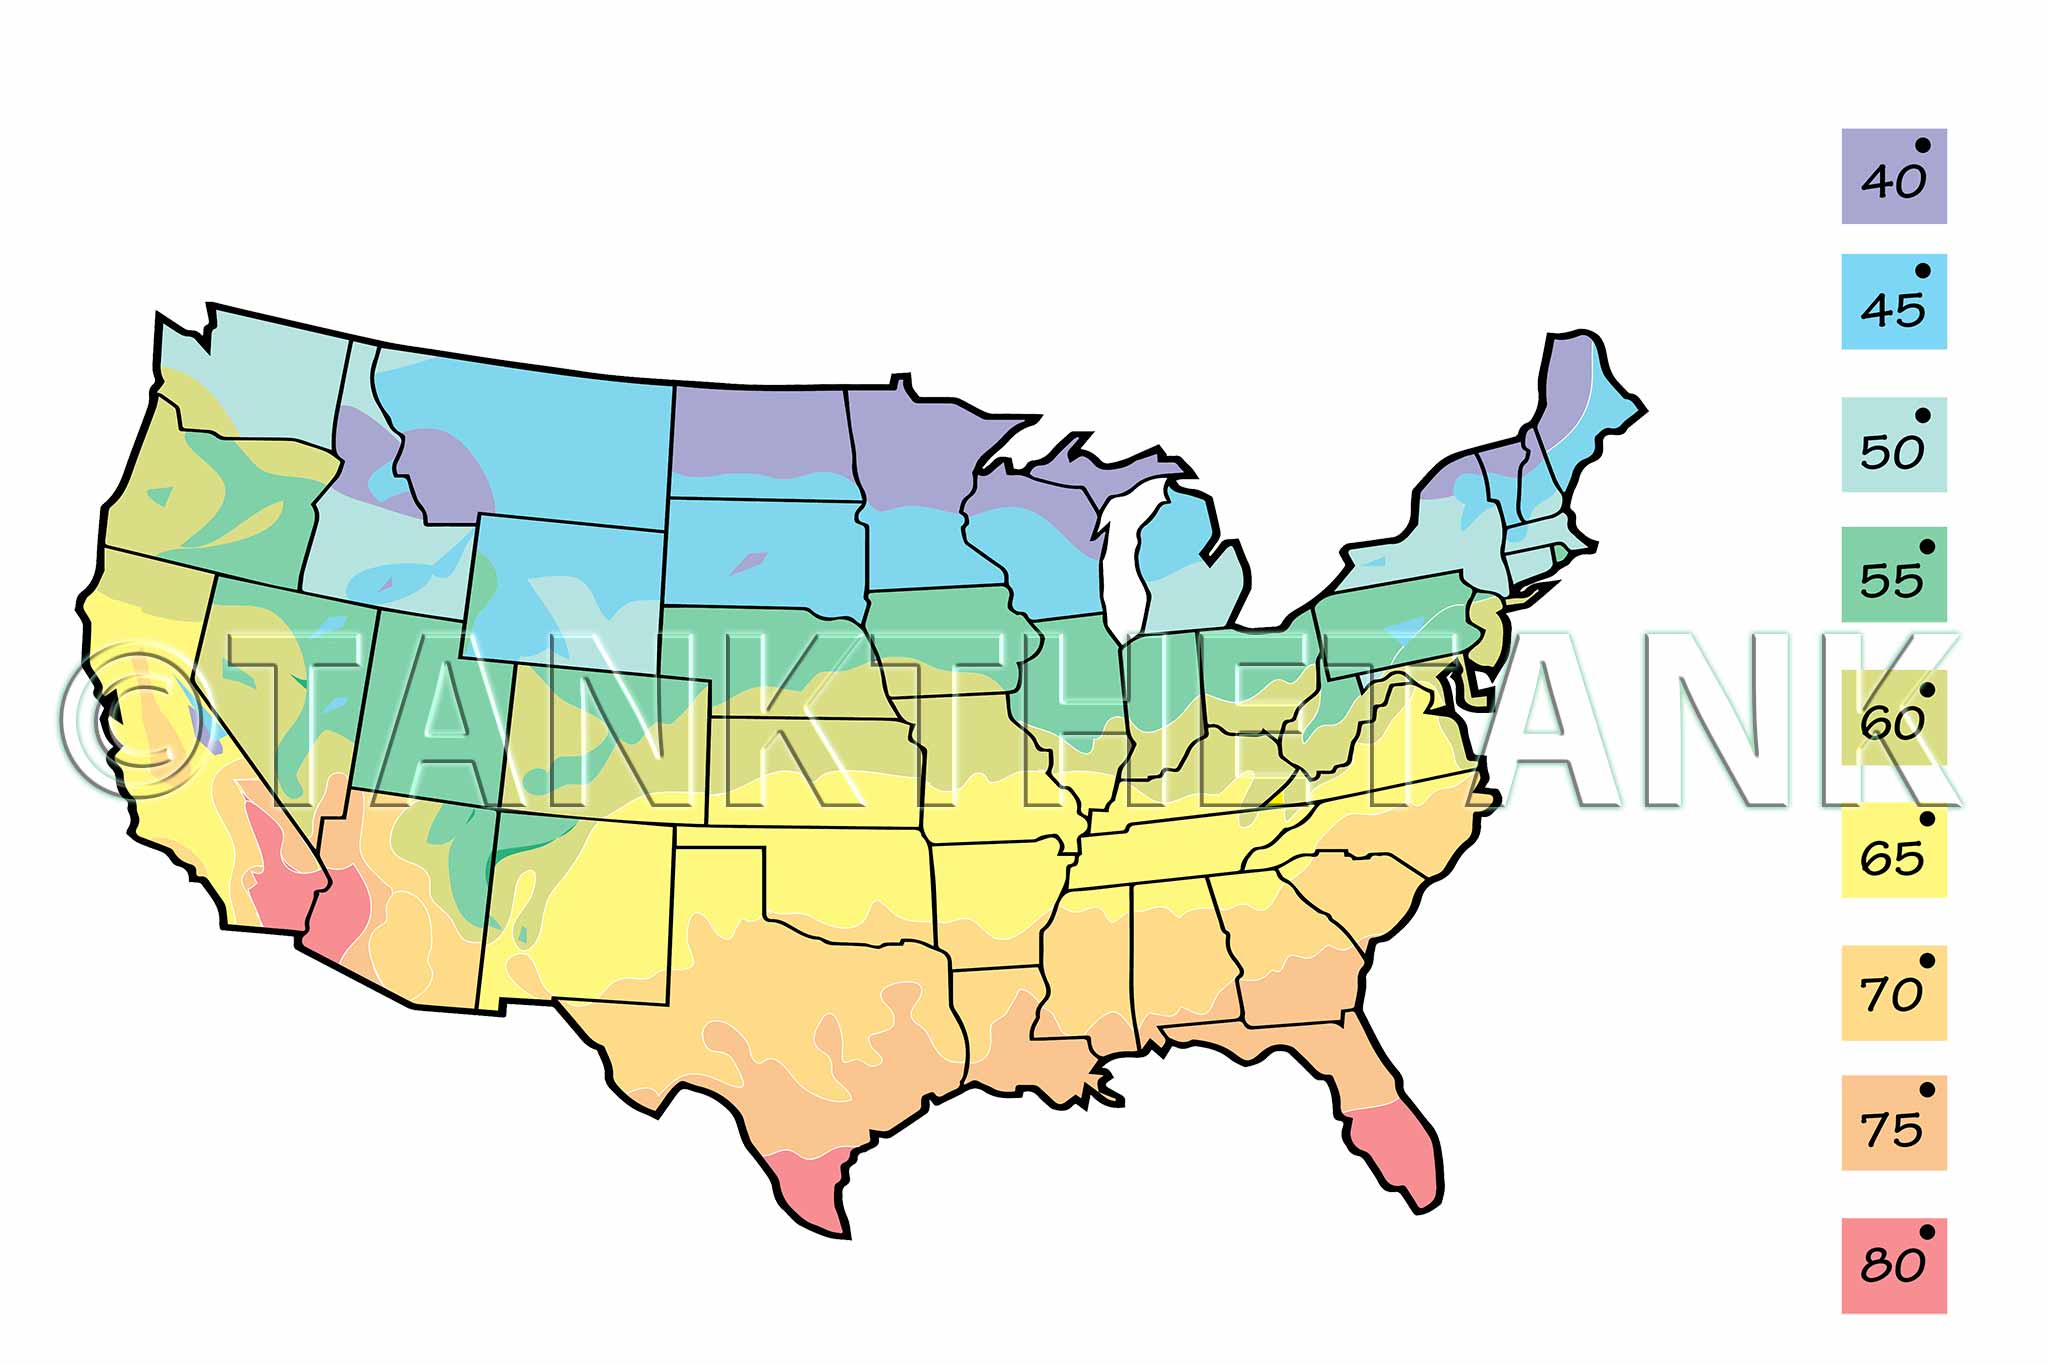 Color coded map of the United States showing average incoming water temperature.